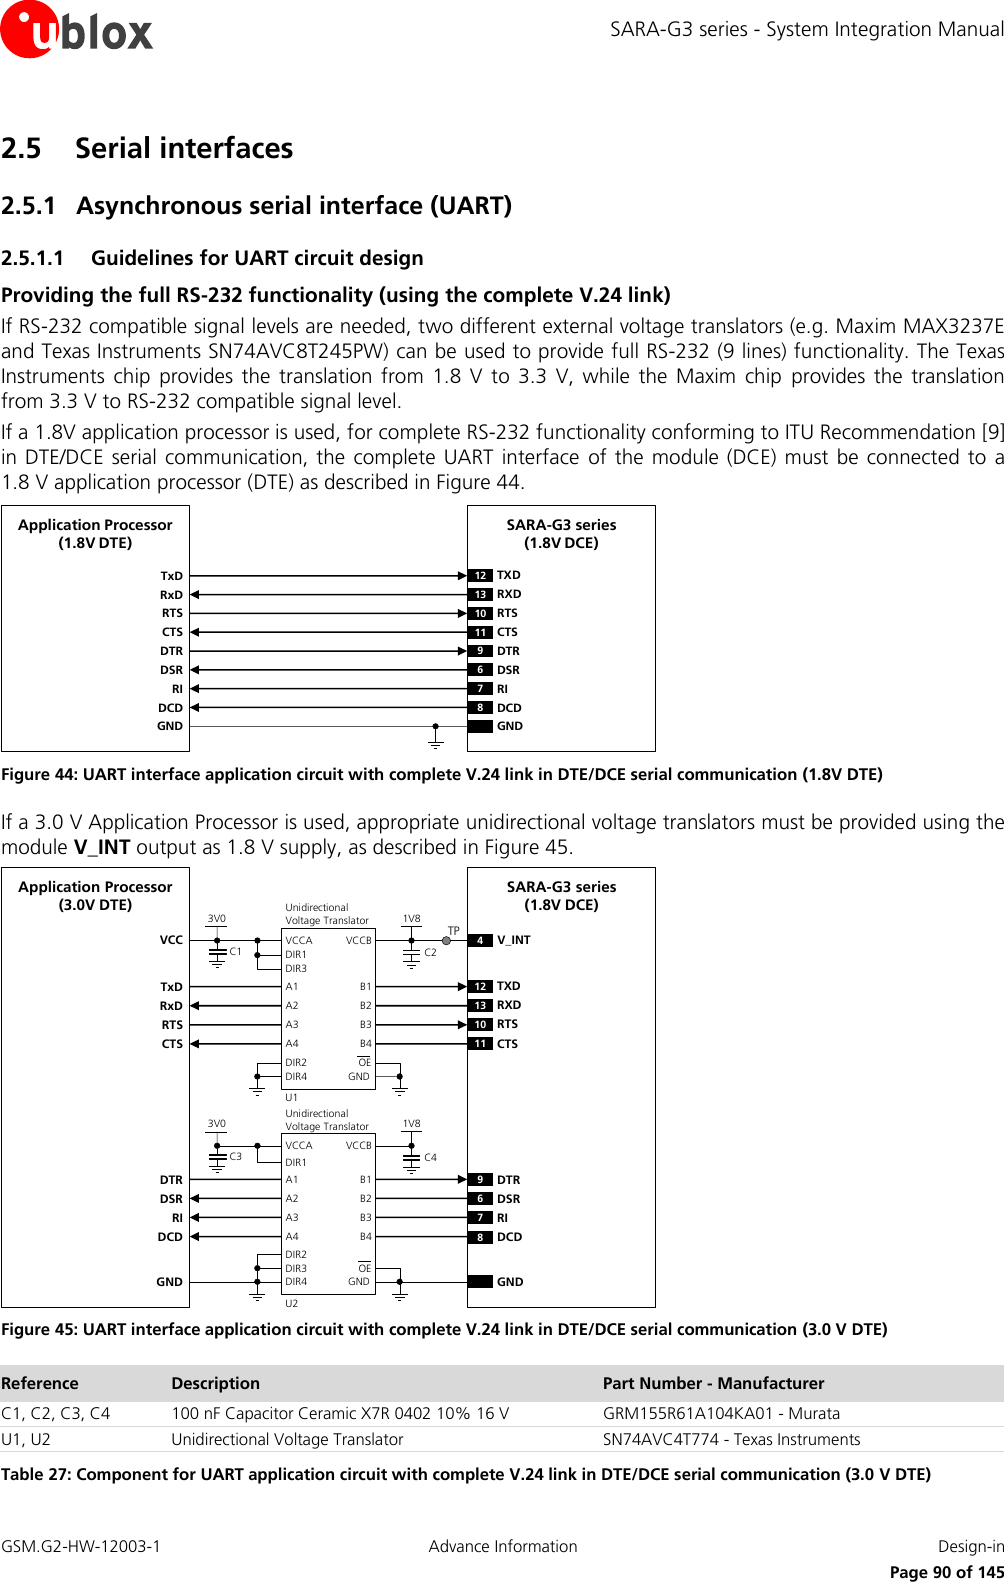 SARA-G3 series - System Integration Manual GSM.G2-HW-12003-1  Advance Information  Design-in     Page 90 of 145 2.5 Serial interfaces 2.5.1 Asynchronous serial interface (UART) 2.5.1.1 Guidelines for UART circuit design Providing the full RS-232 functionality (using the complete V.24 link) If RS-232 compatible signal levels are needed, two different external voltage translators (e.g. Maxim MAX3237E and Texas Instruments SN74AVC8T245PW) can be used to provide full RS-232 (9 lines) functionality. The Texas Instruments  chip  provides  the  translation  from  1.8  V  to  3.3  V,  while  the  Maxim  chip  provides  the  translation from 3.3 V to RS-232 compatible signal level. If a 1.8V application processor is used, for complete RS-232 functionality conforming to ITU Recommendation [9] in DTE/DCE  serial communication, the  complete UART  interface of the module (DCE) must  be connected to  a 1.8 V application processor (DTE) as described in Figure 44. TxDApplication Processor(1.8V DTE)RxDRTSCTSDTRDSRRIDCDGNDSARA-G3 series (1.8V DCE)12 TXD9DTR13 RXD10 RTS11 CTS6DSR7RI8DCDGND Figure 44: UART interface application circuit with complete V.24 link in DTE/DCE serial communication (1.8V DTE) If a 3.0 V Application Processor is used, appropriate unidirectional voltage translators must be provided using the module V_INT output as 1.8 V supply, as described in Figure 45. 4V_INTTxDApplication Processor(3.0V DTE)RxDRTSCTSDTRDSRRIDCDGNDSARA-G3 series (1.8V DCE)12 TXD9DTR13 RXD10 RTS11 CTS6DSR7RI8DCDGND1V8B1 A1GNDU1B3A3VCCBVCCAUnidirectionalVoltage TranslatorC1 C23V0DIR3DIR2 OEDIR1VCCB2 A2B4A4DIR41V8B1 A1GNDU2B3A3VCCBVCCAUnidirectionalVoltage TranslatorC3 C43V0DIR1DIR3 OEB2 A2B4A4DIR4DIR2TP Figure 45: UART interface application circuit with complete V.24 link in DTE/DCE serial communication (3.0 V DTE) Reference Description Part Number - Manufacturer C1, C2, C3, C4 100 nF Capacitor Ceramic X7R 0402 10% 16 V GRM155R61A104KA01 - Murata U1, U2 Unidirectional Voltage Translator SN74AVC4T774 - Texas Instruments Table 27: Component for UART application circuit with complete V.24 link in DTE/DCE serial communication (3.0 V DTE) 